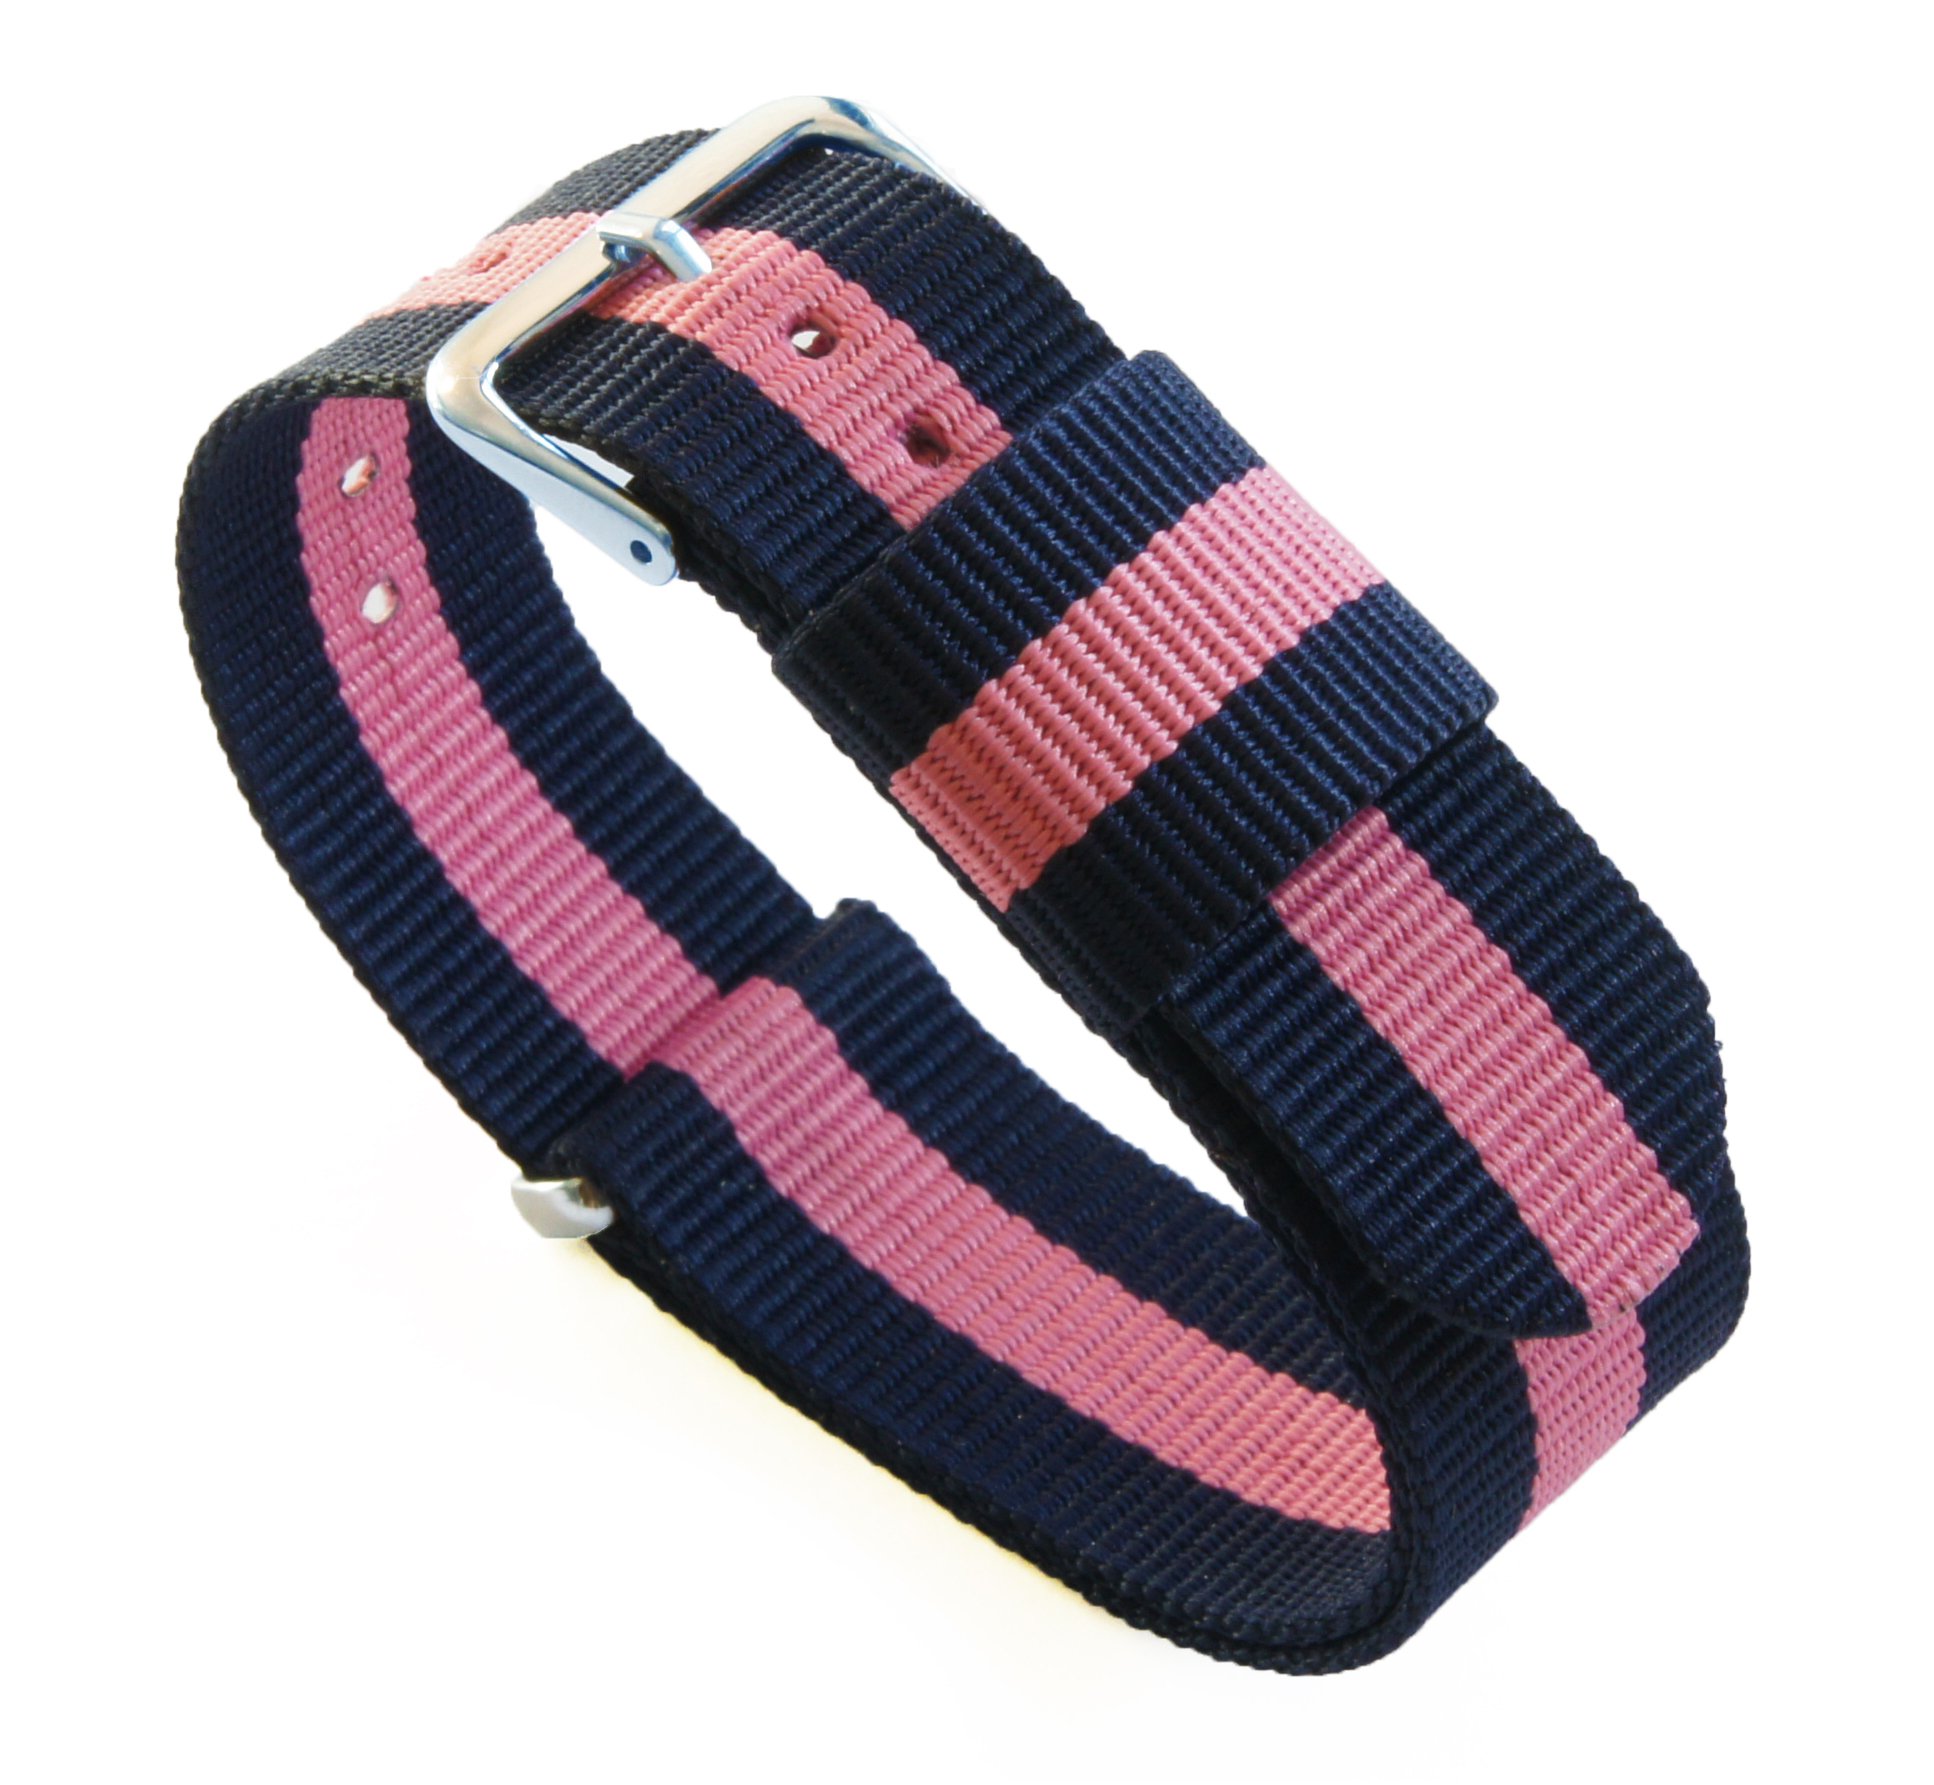 BARTON WATCH BANDS - Ballistic Nylon NATO® Style Straps - Choice of Color, Length & Width (18mm, 20mm, 22mm or 24mm)